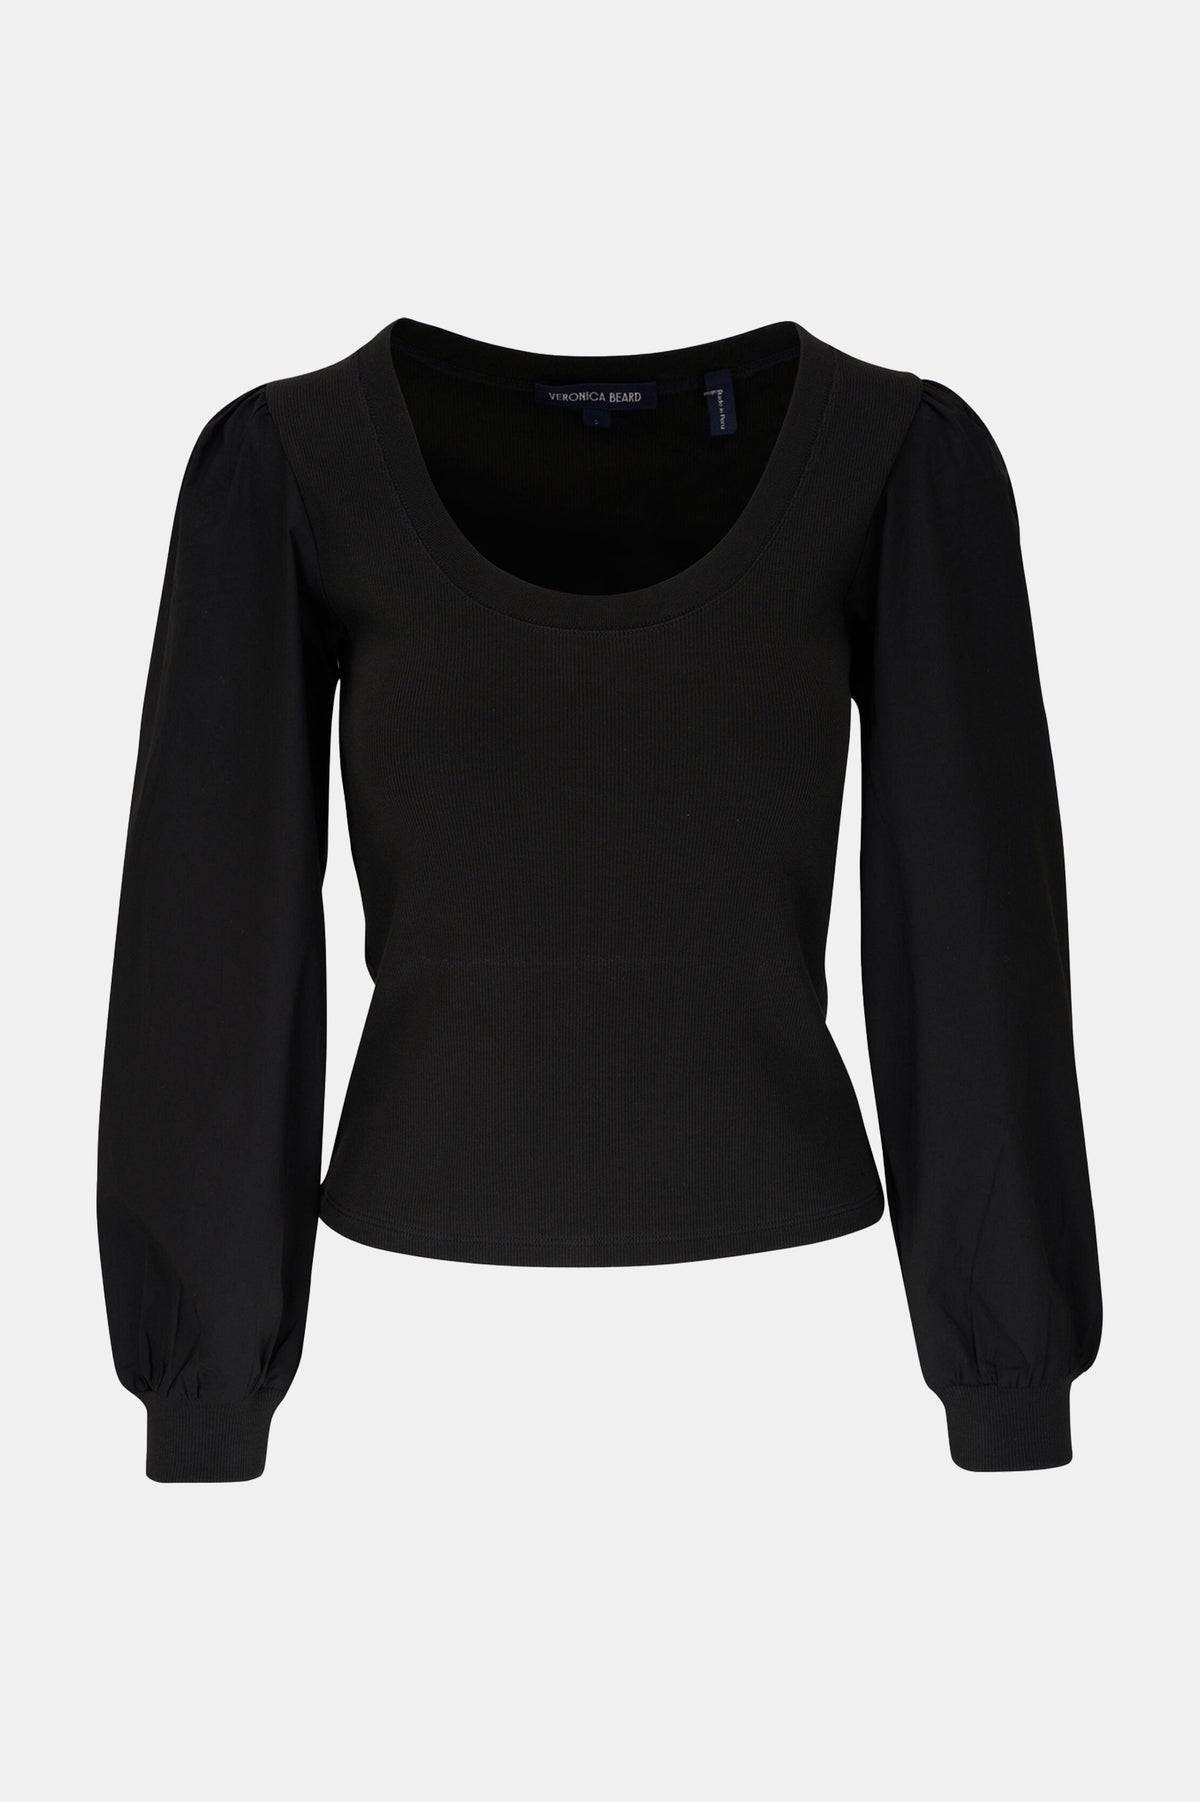 Anabel Top in Black